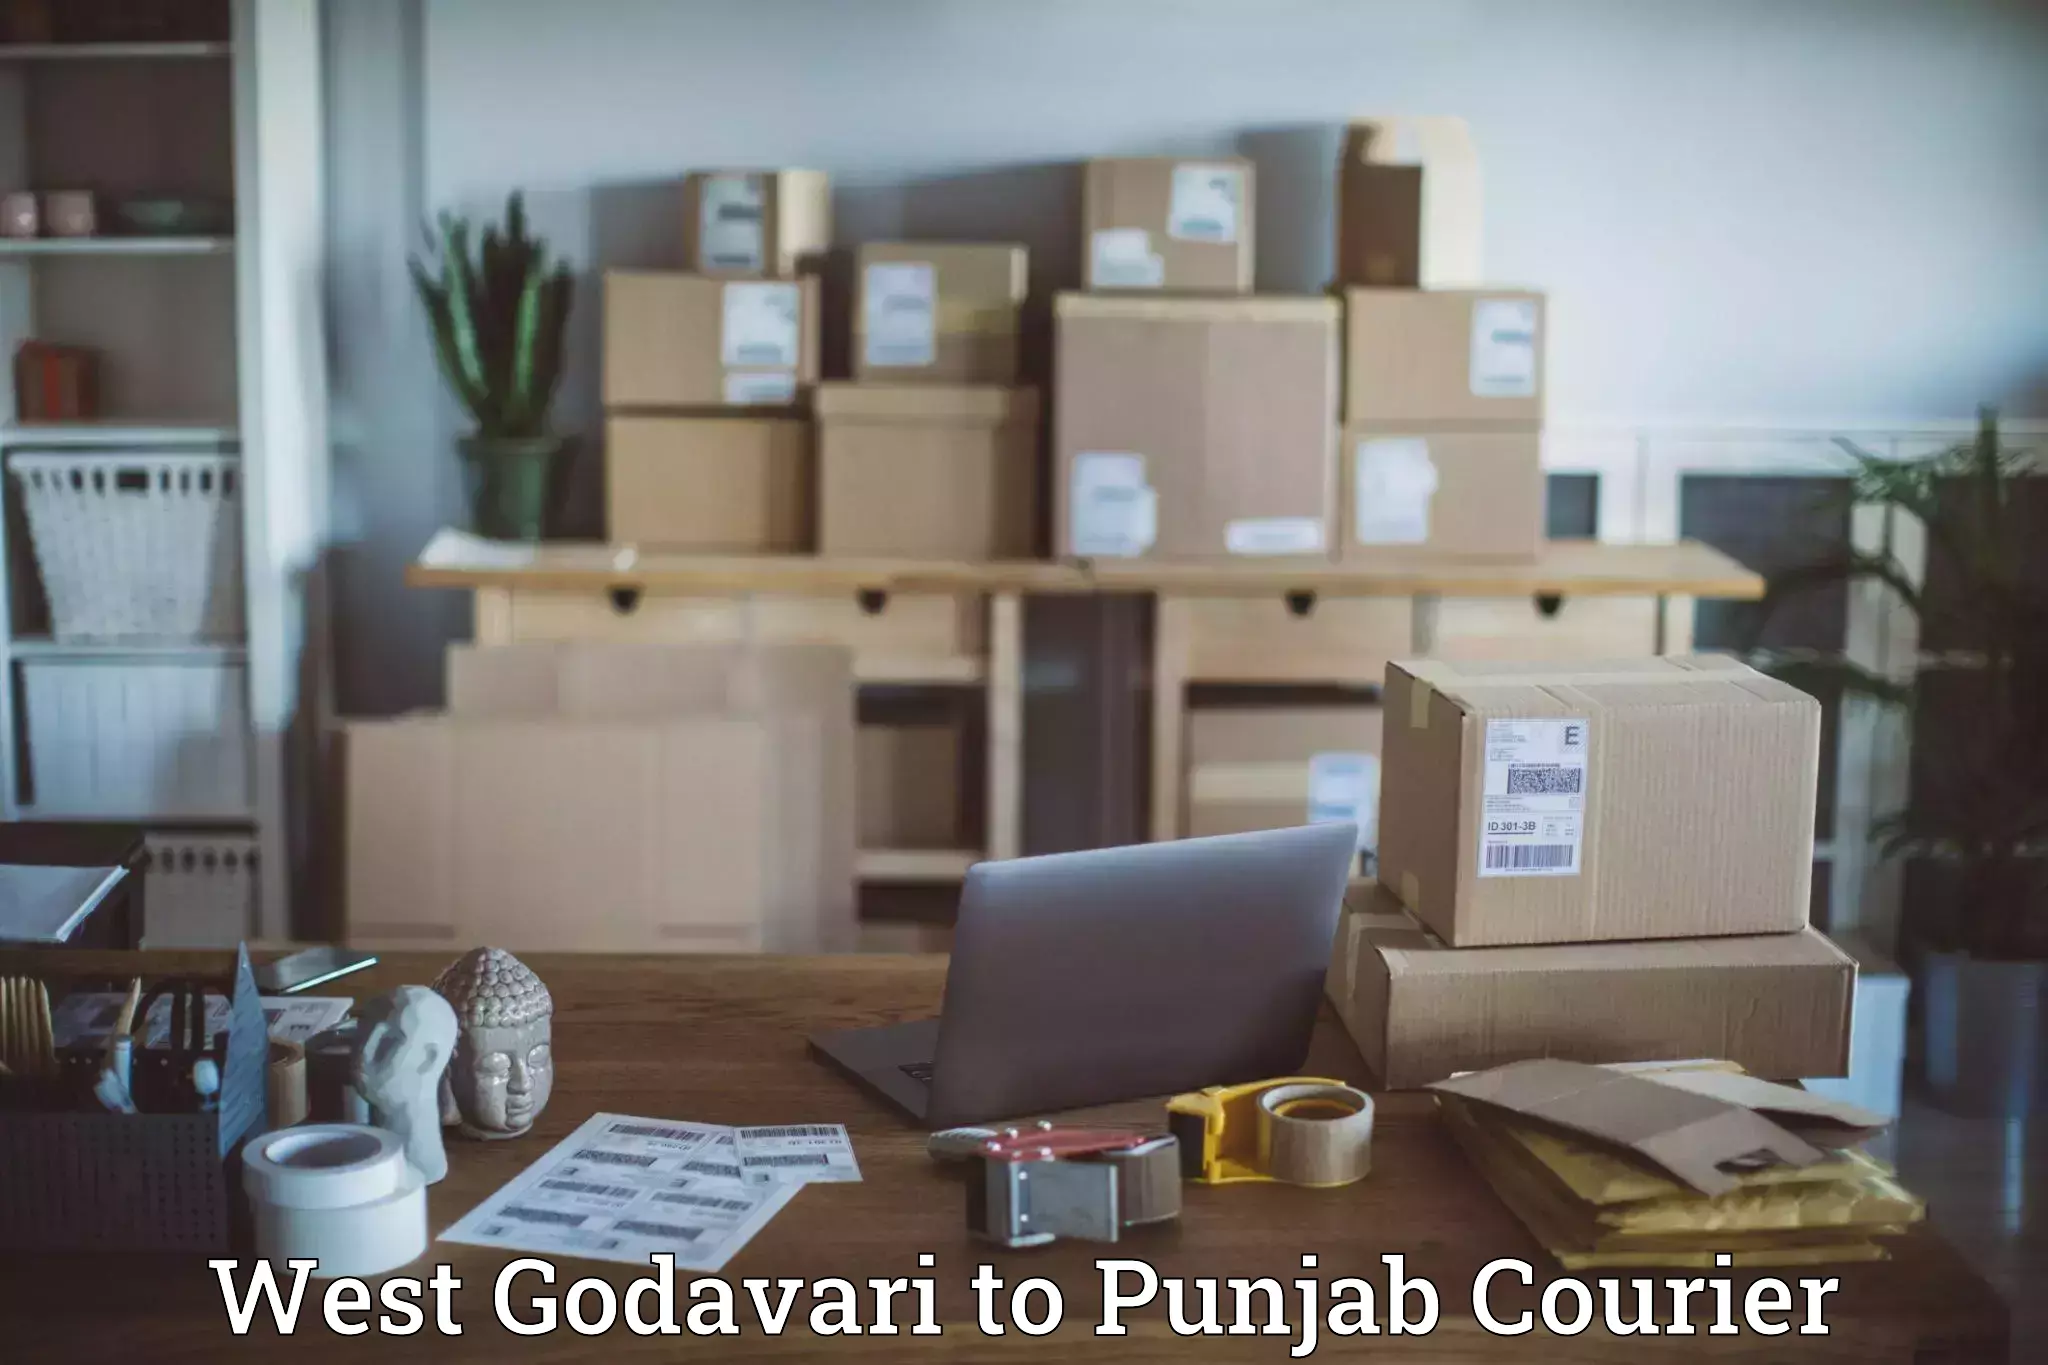 Reliable delivery network West Godavari to Ropar